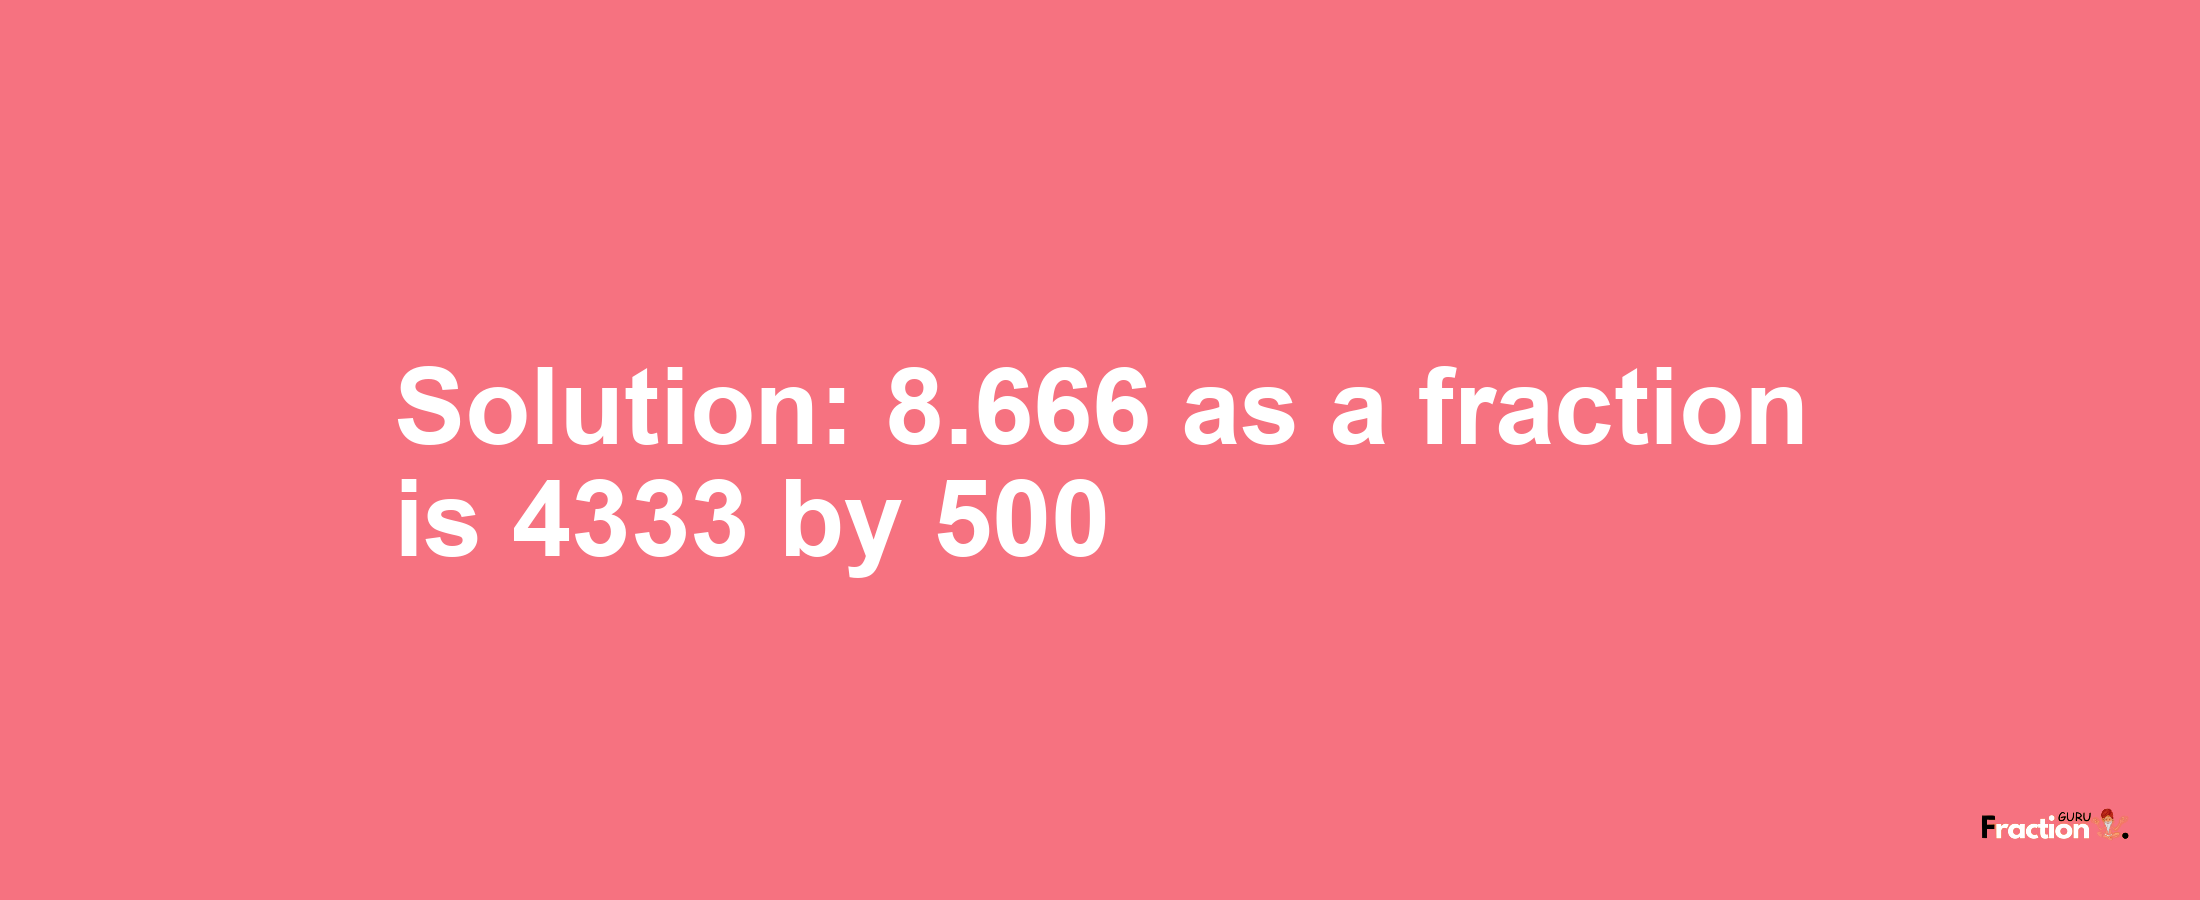 Solution:8.666 as a fraction is 4333/500